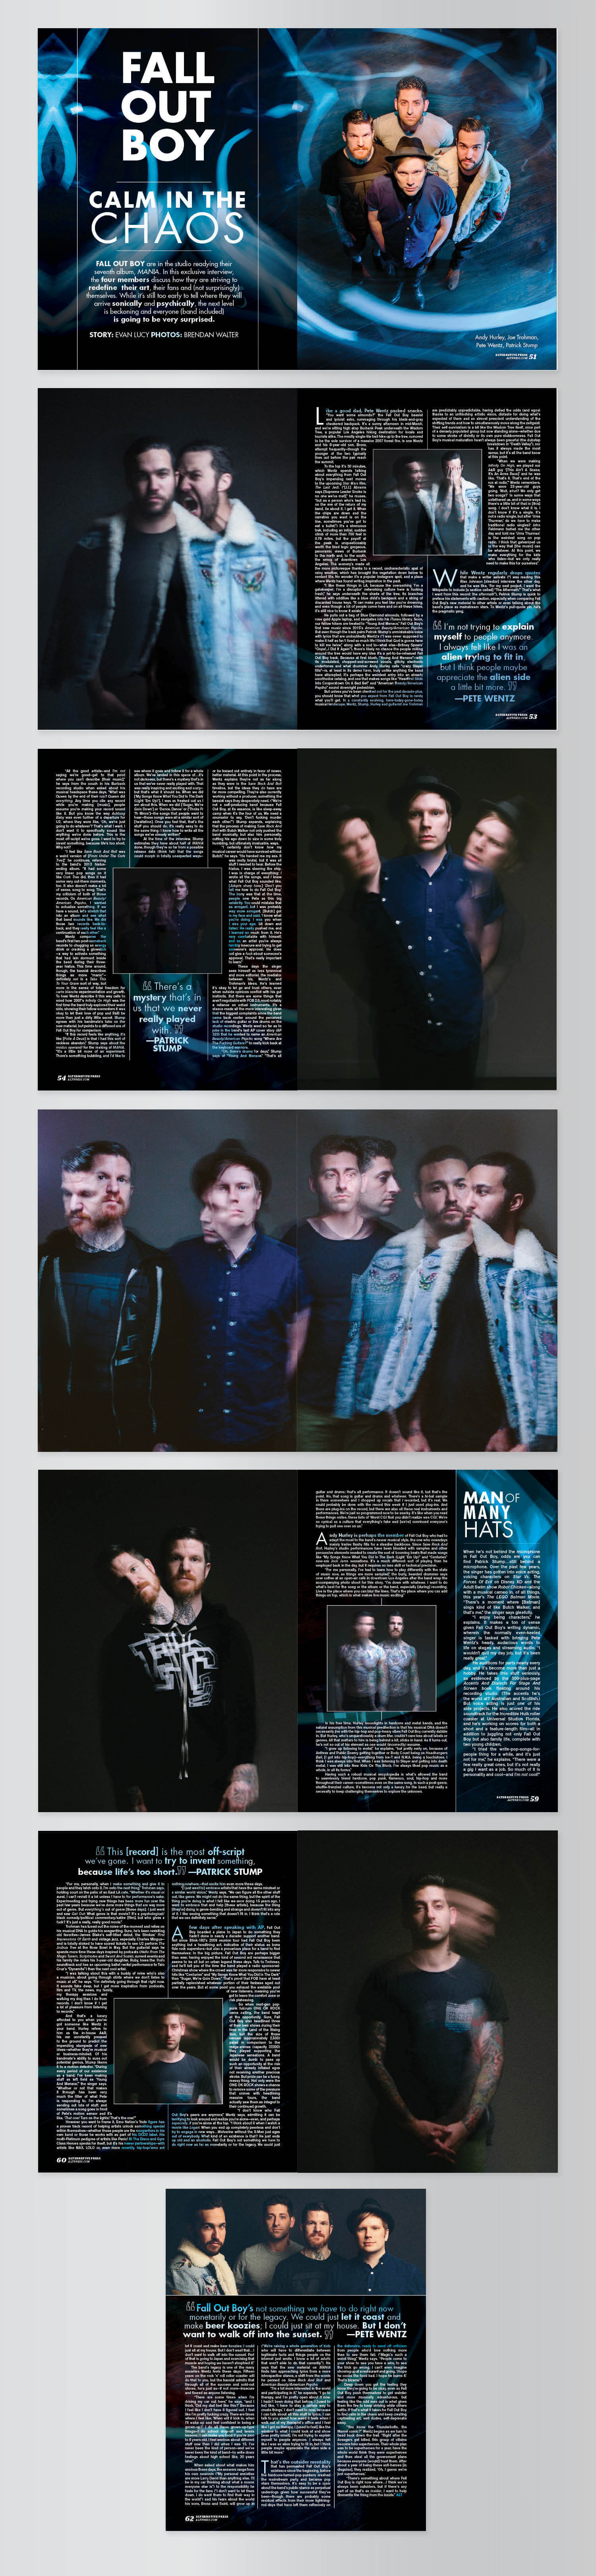 Fall Out Boy Cover Story